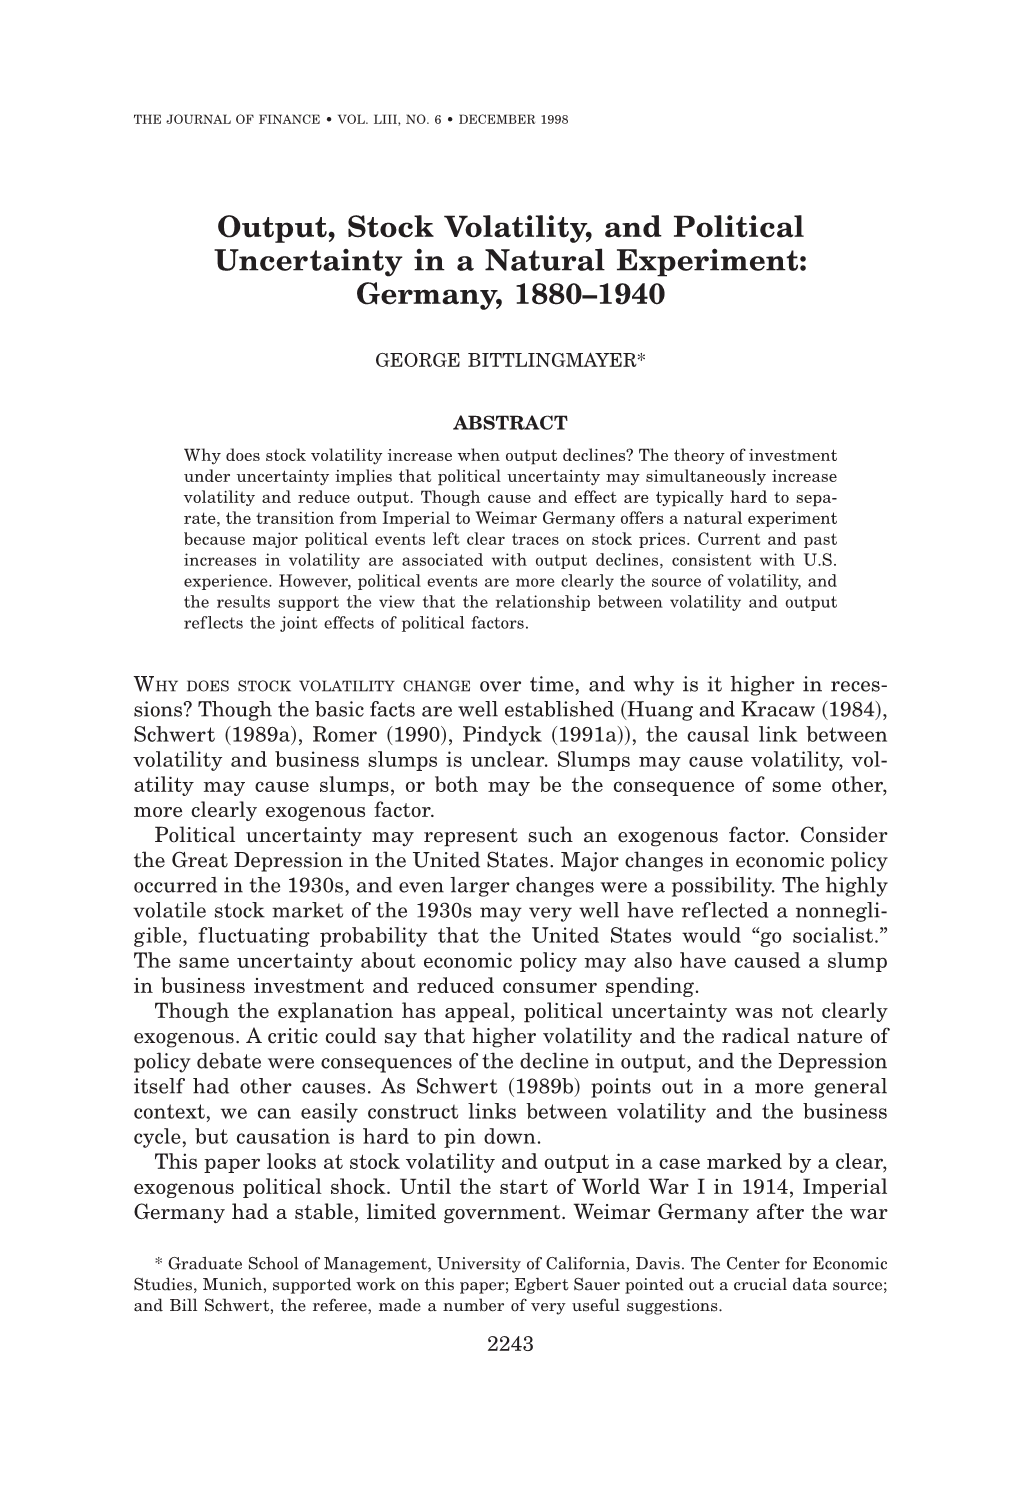 Output, Stock Volatility, and Political Uncertainty in a Natural Experiment: Germany, 1880–1940